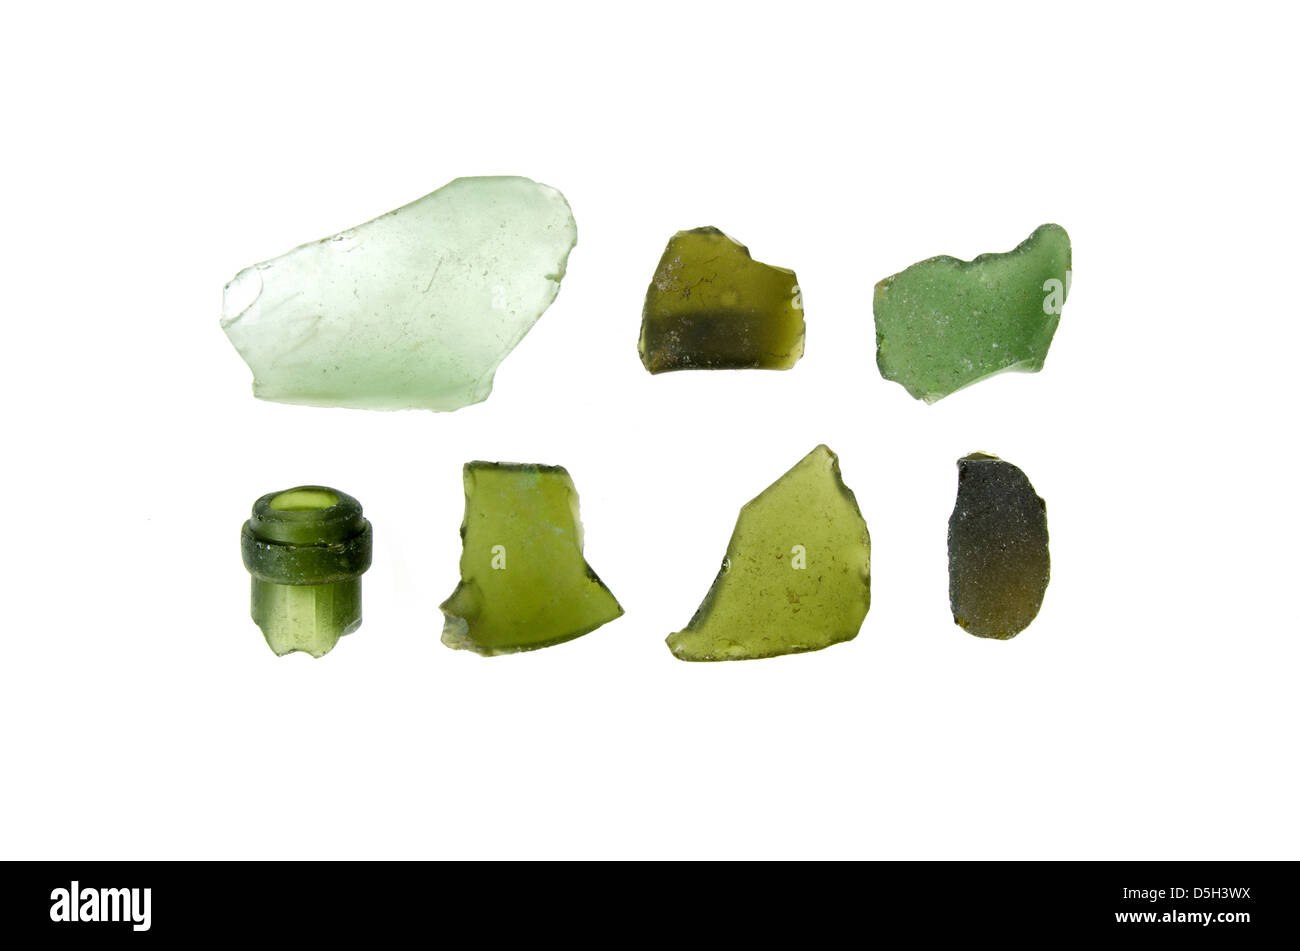 Seven pieces of weathered green sea glass found on the coast of Maine. Stock Photo